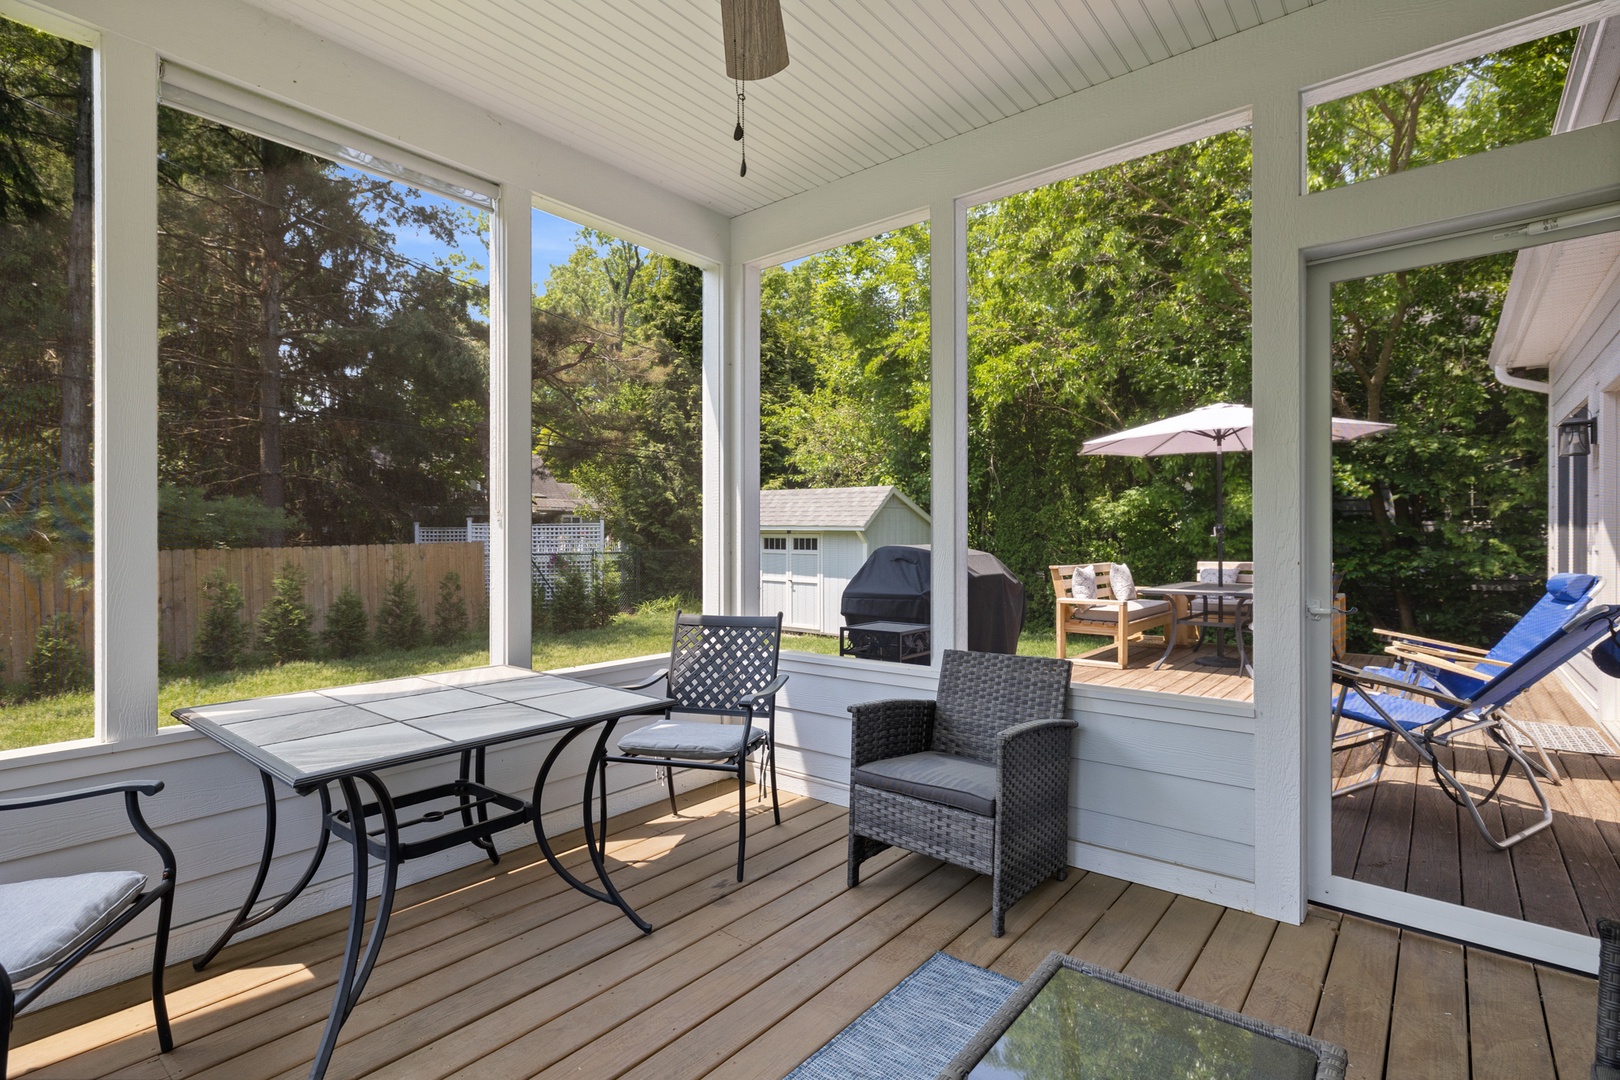 Our screened porch is a pure delight on summer afternoons.